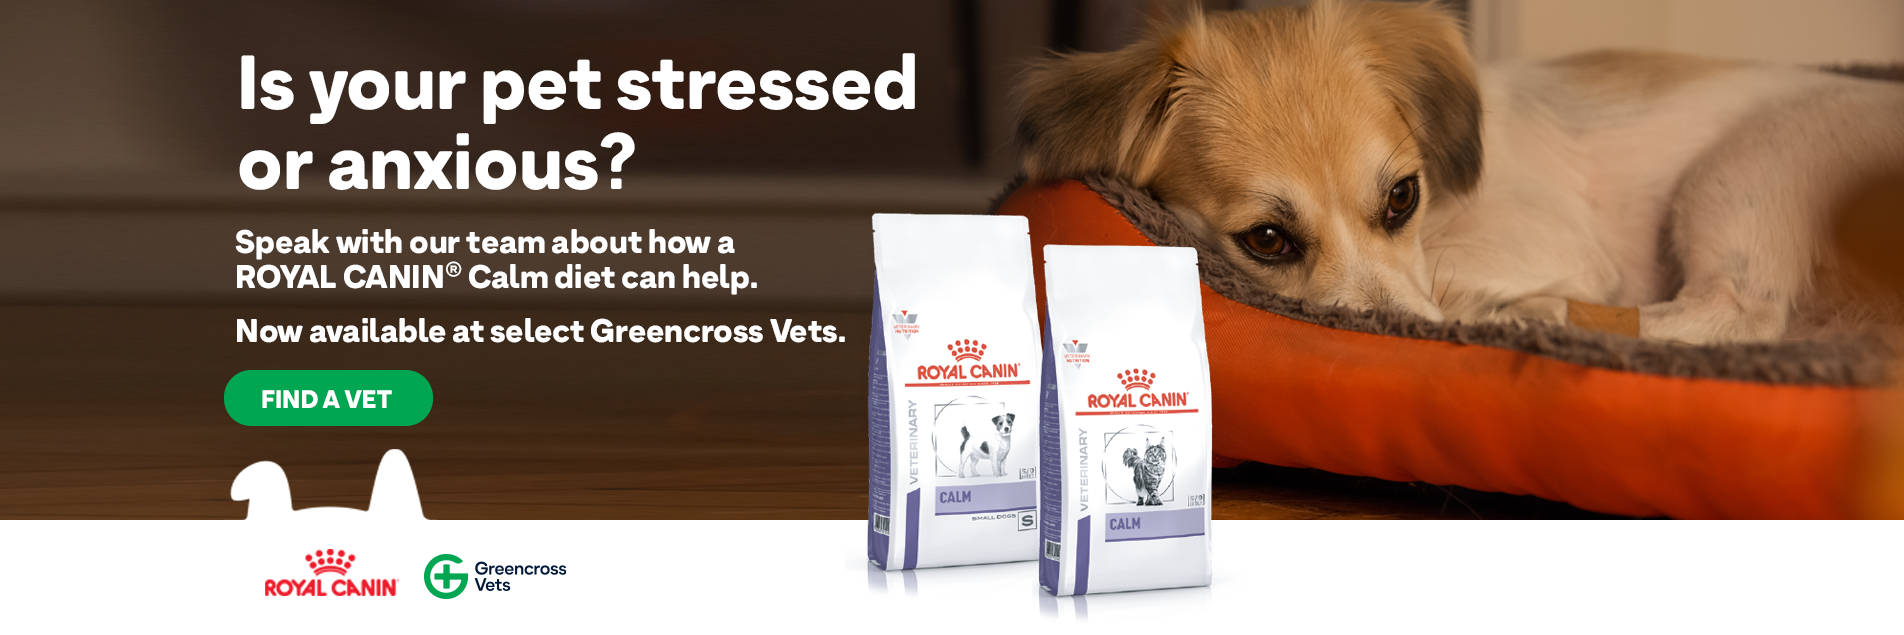 Royal Canin Calm dog and cat food product banner. Now available at Greencross Vets.